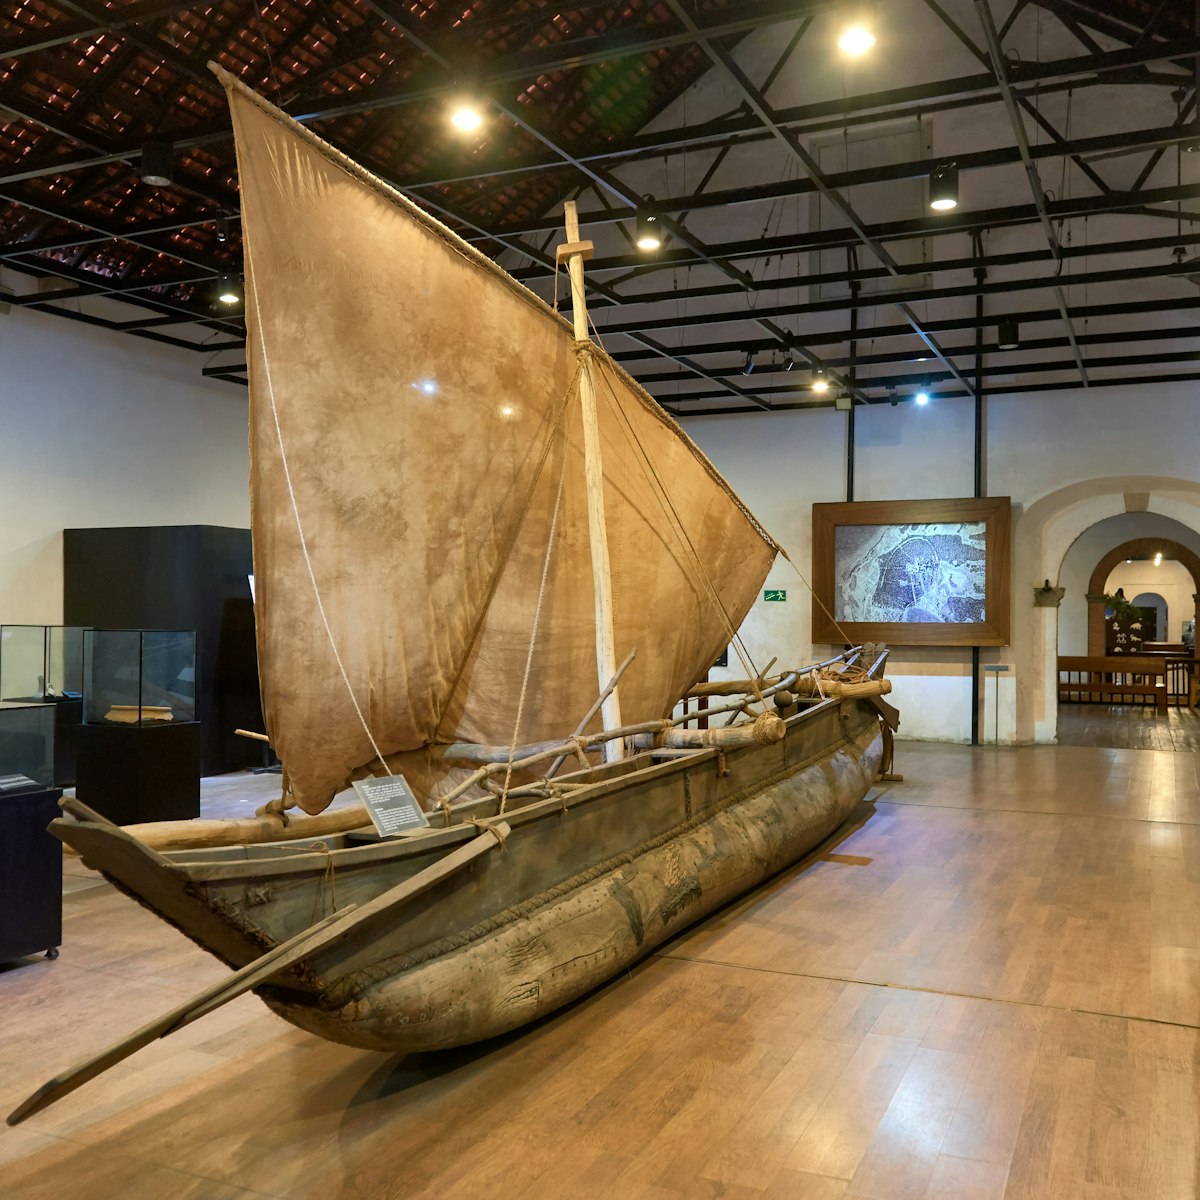 The old fishing sailboat in the maritime museum in Galle, Sri Lanka.